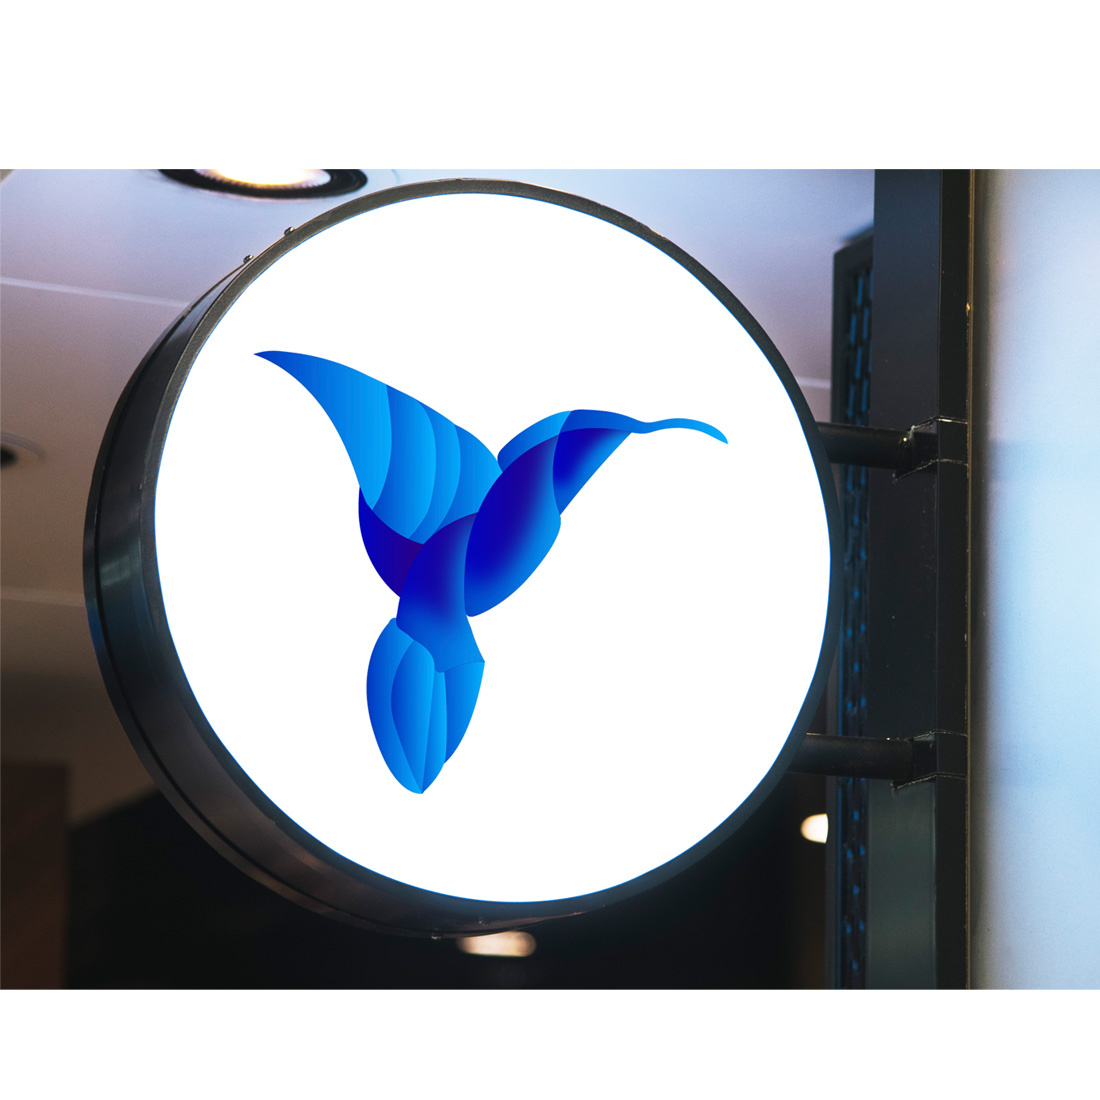 Bird logo design with gradient blue color cover image.